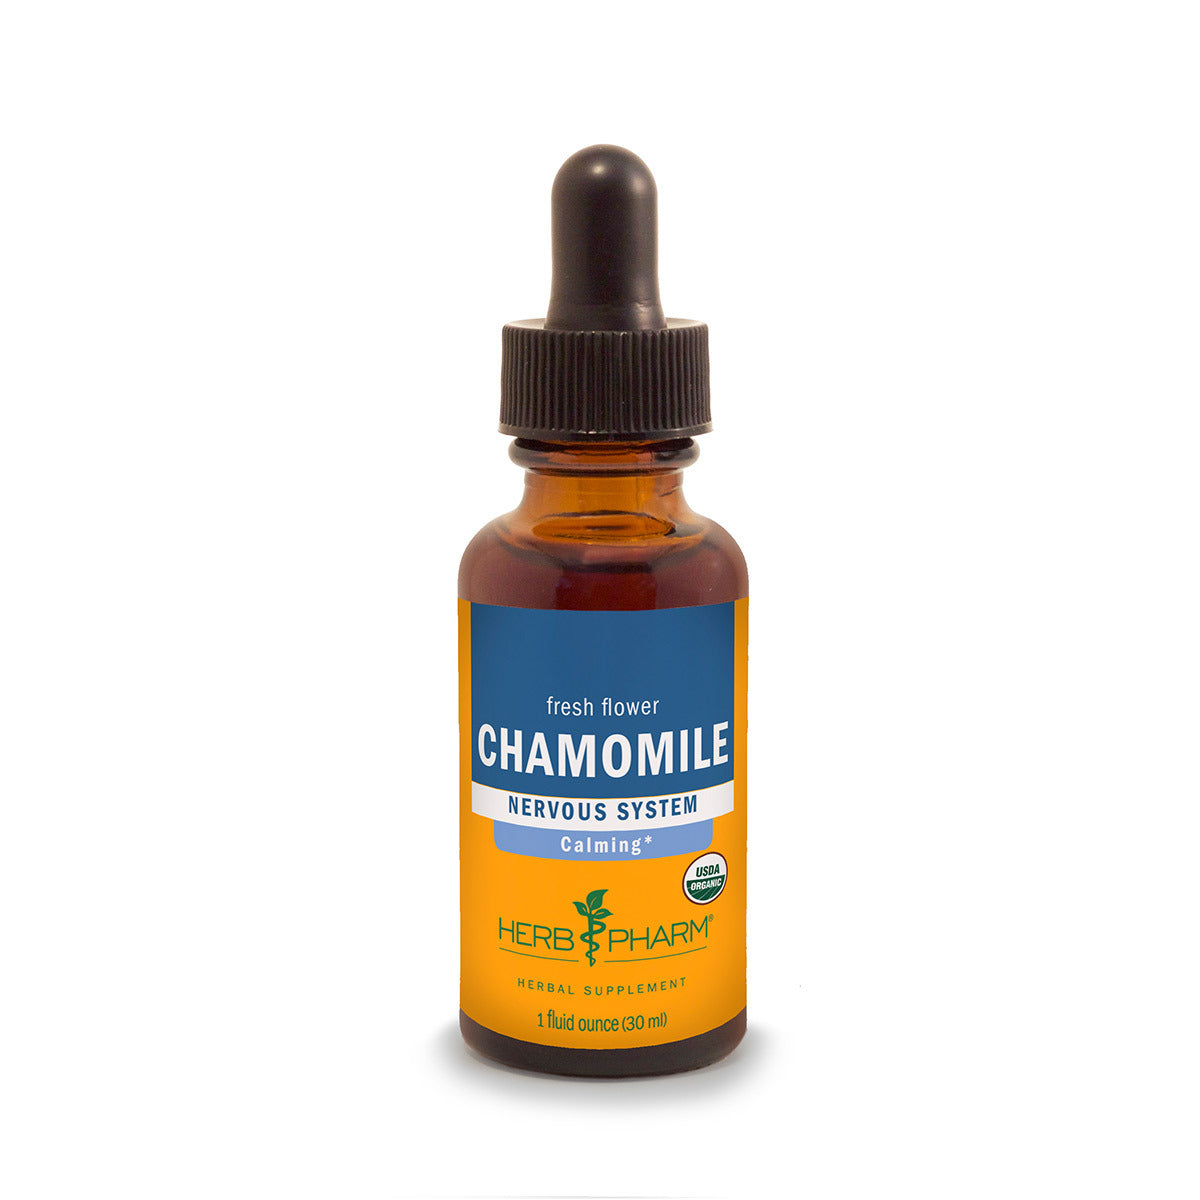 Primary image of Chamomile Extract